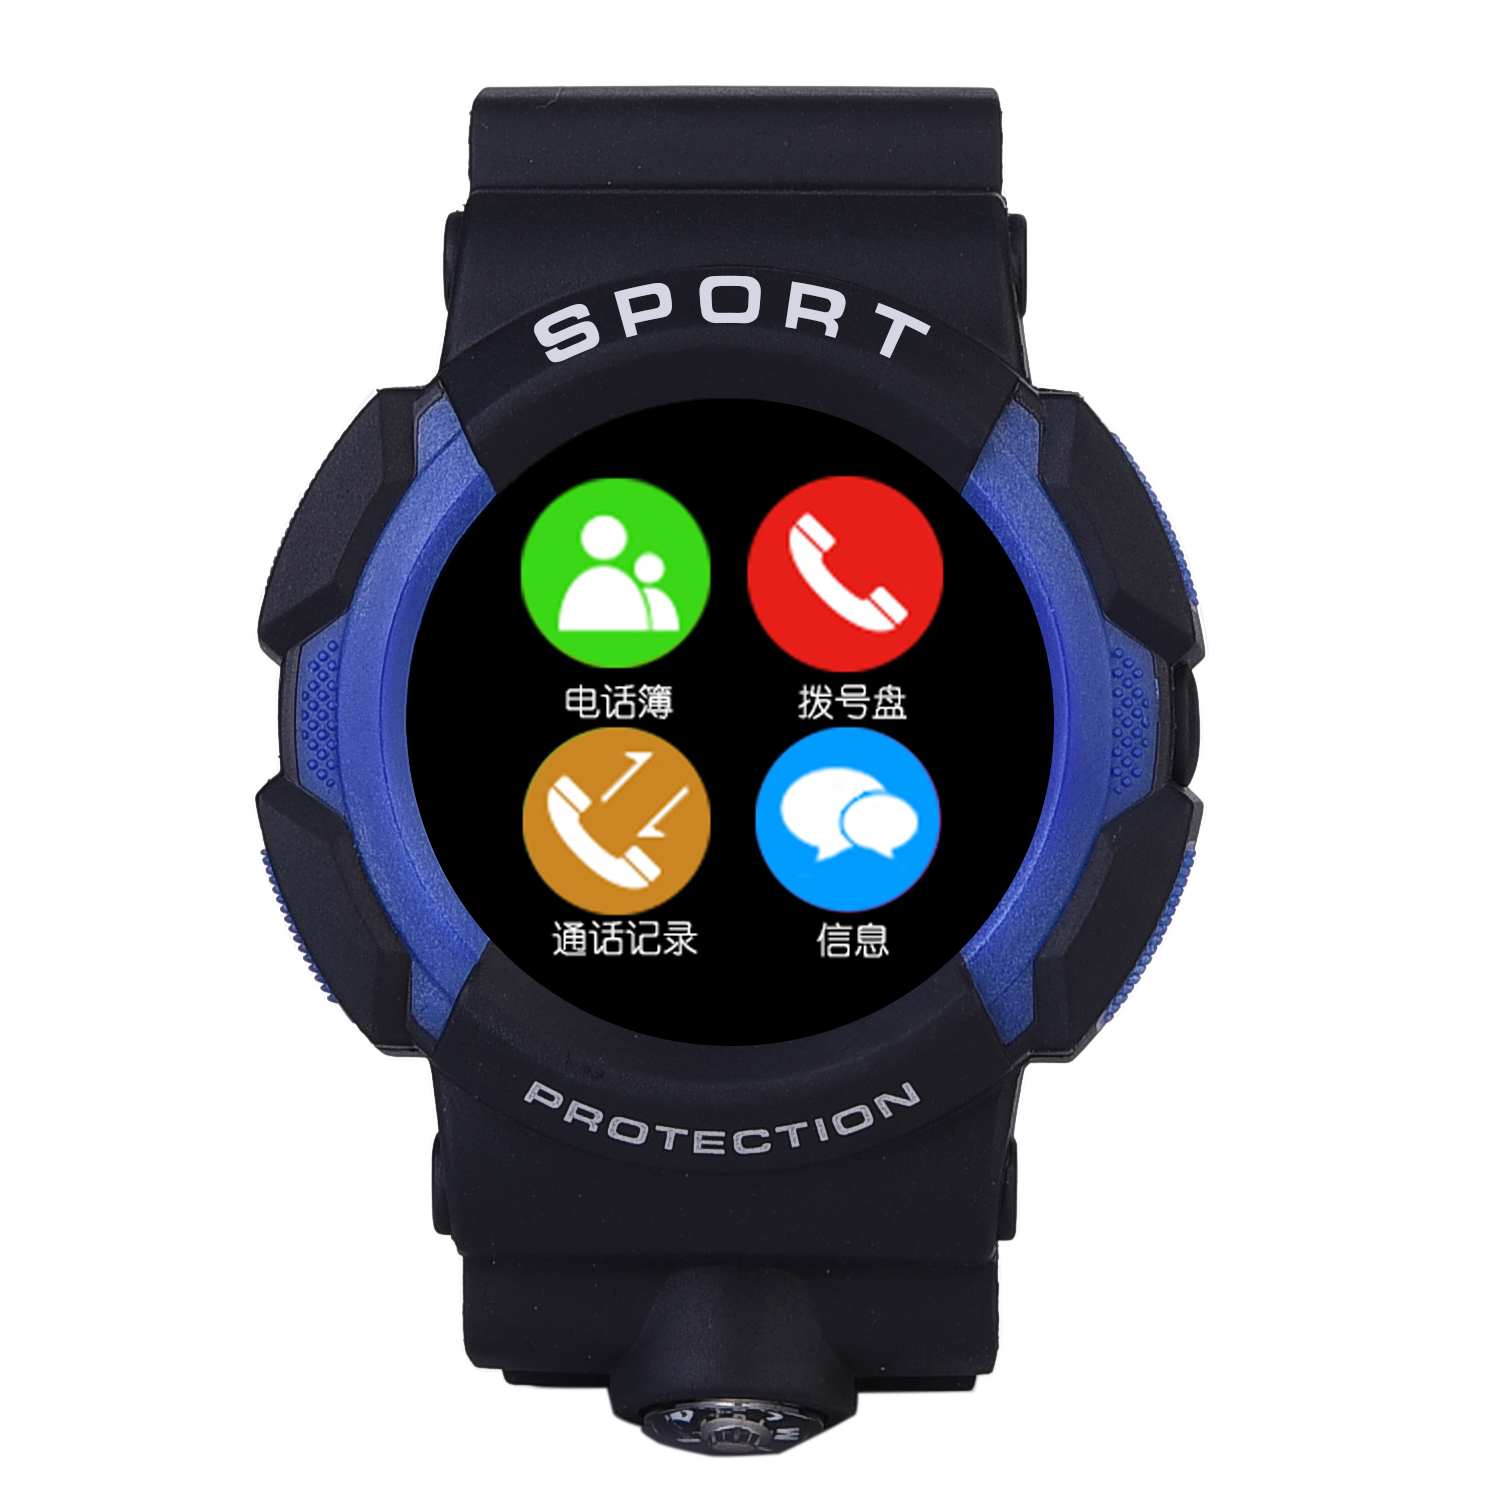 A10-Waterproof-Sport-Smart-Watch-MT2502-With-bluetooth-G-sensor-For-Android-iOS-Phone-1032194-5